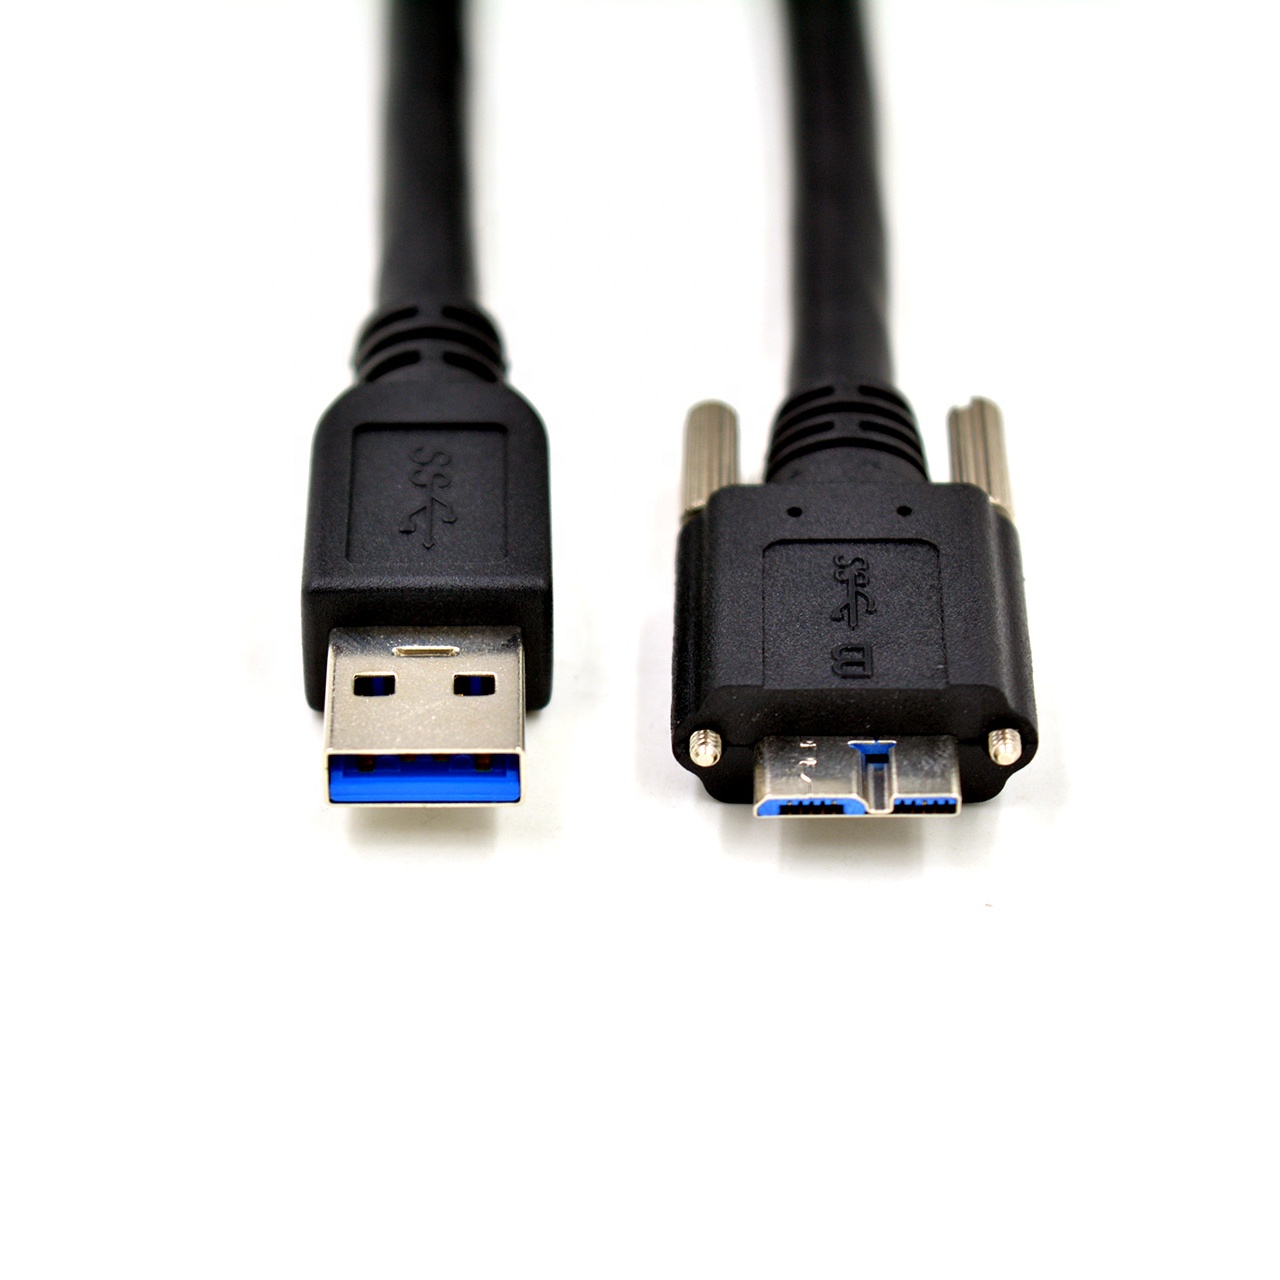 Industrial USB 3.0 A/A male cable 3M